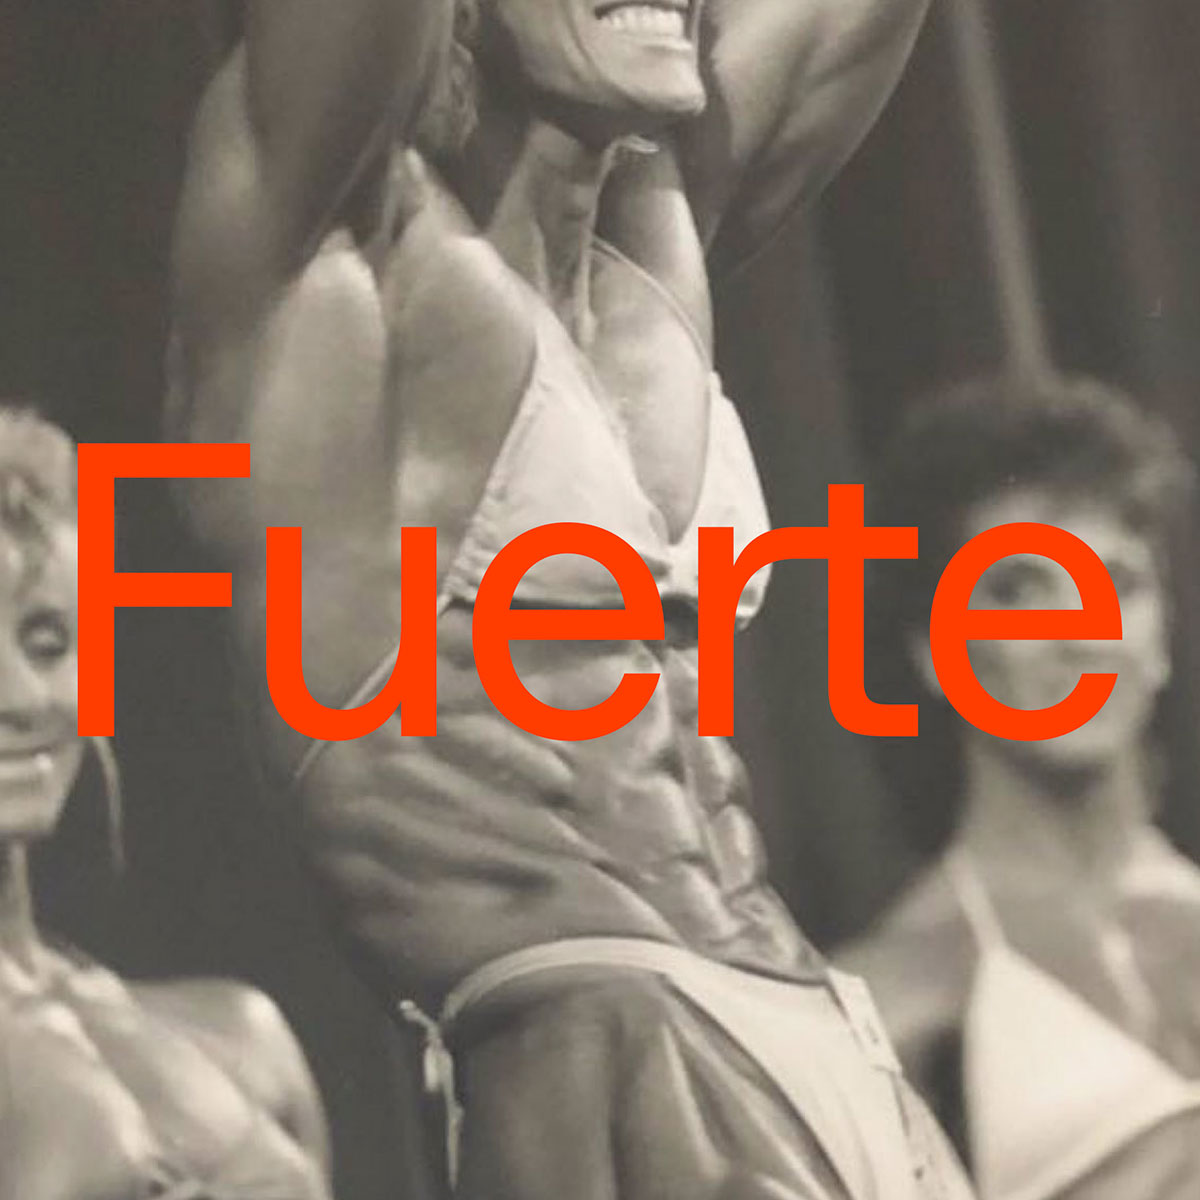 FuerteMuscle2